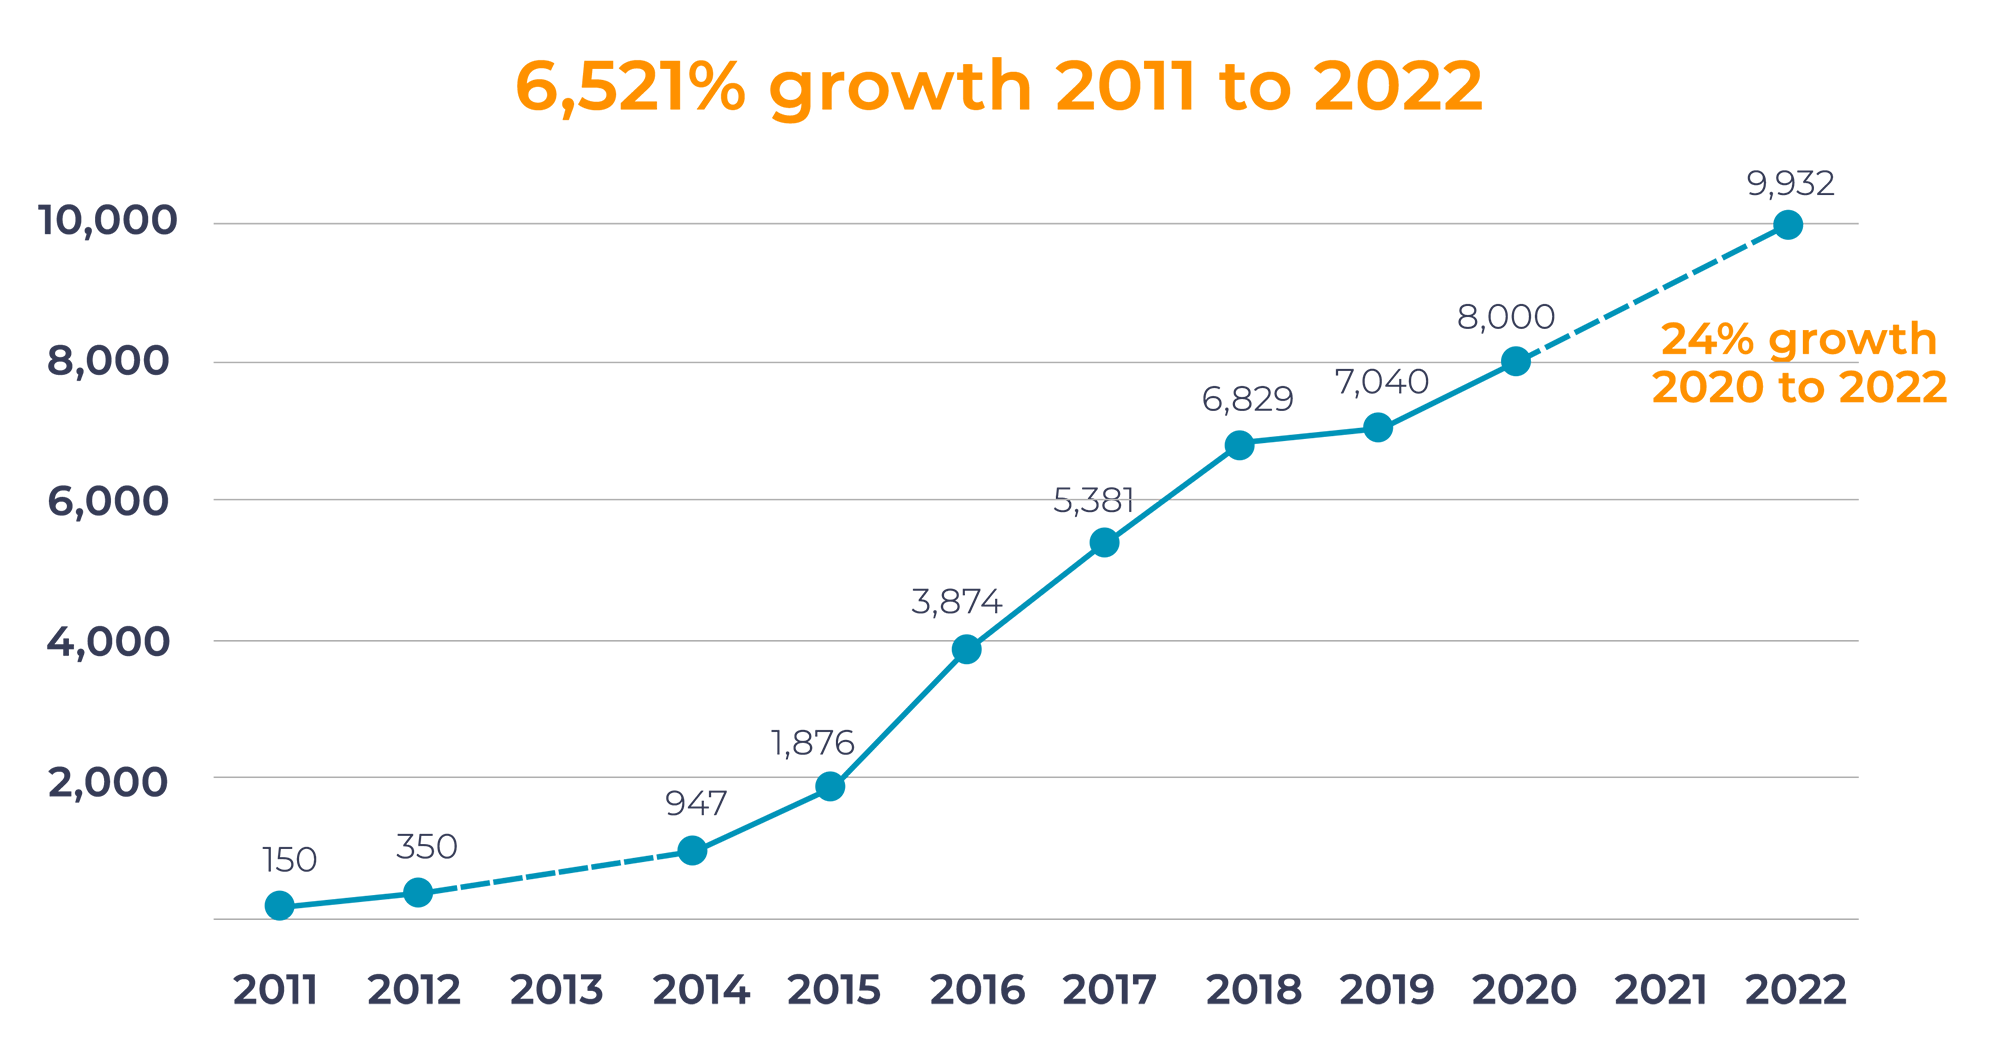 Growth of MarTech tools on the market